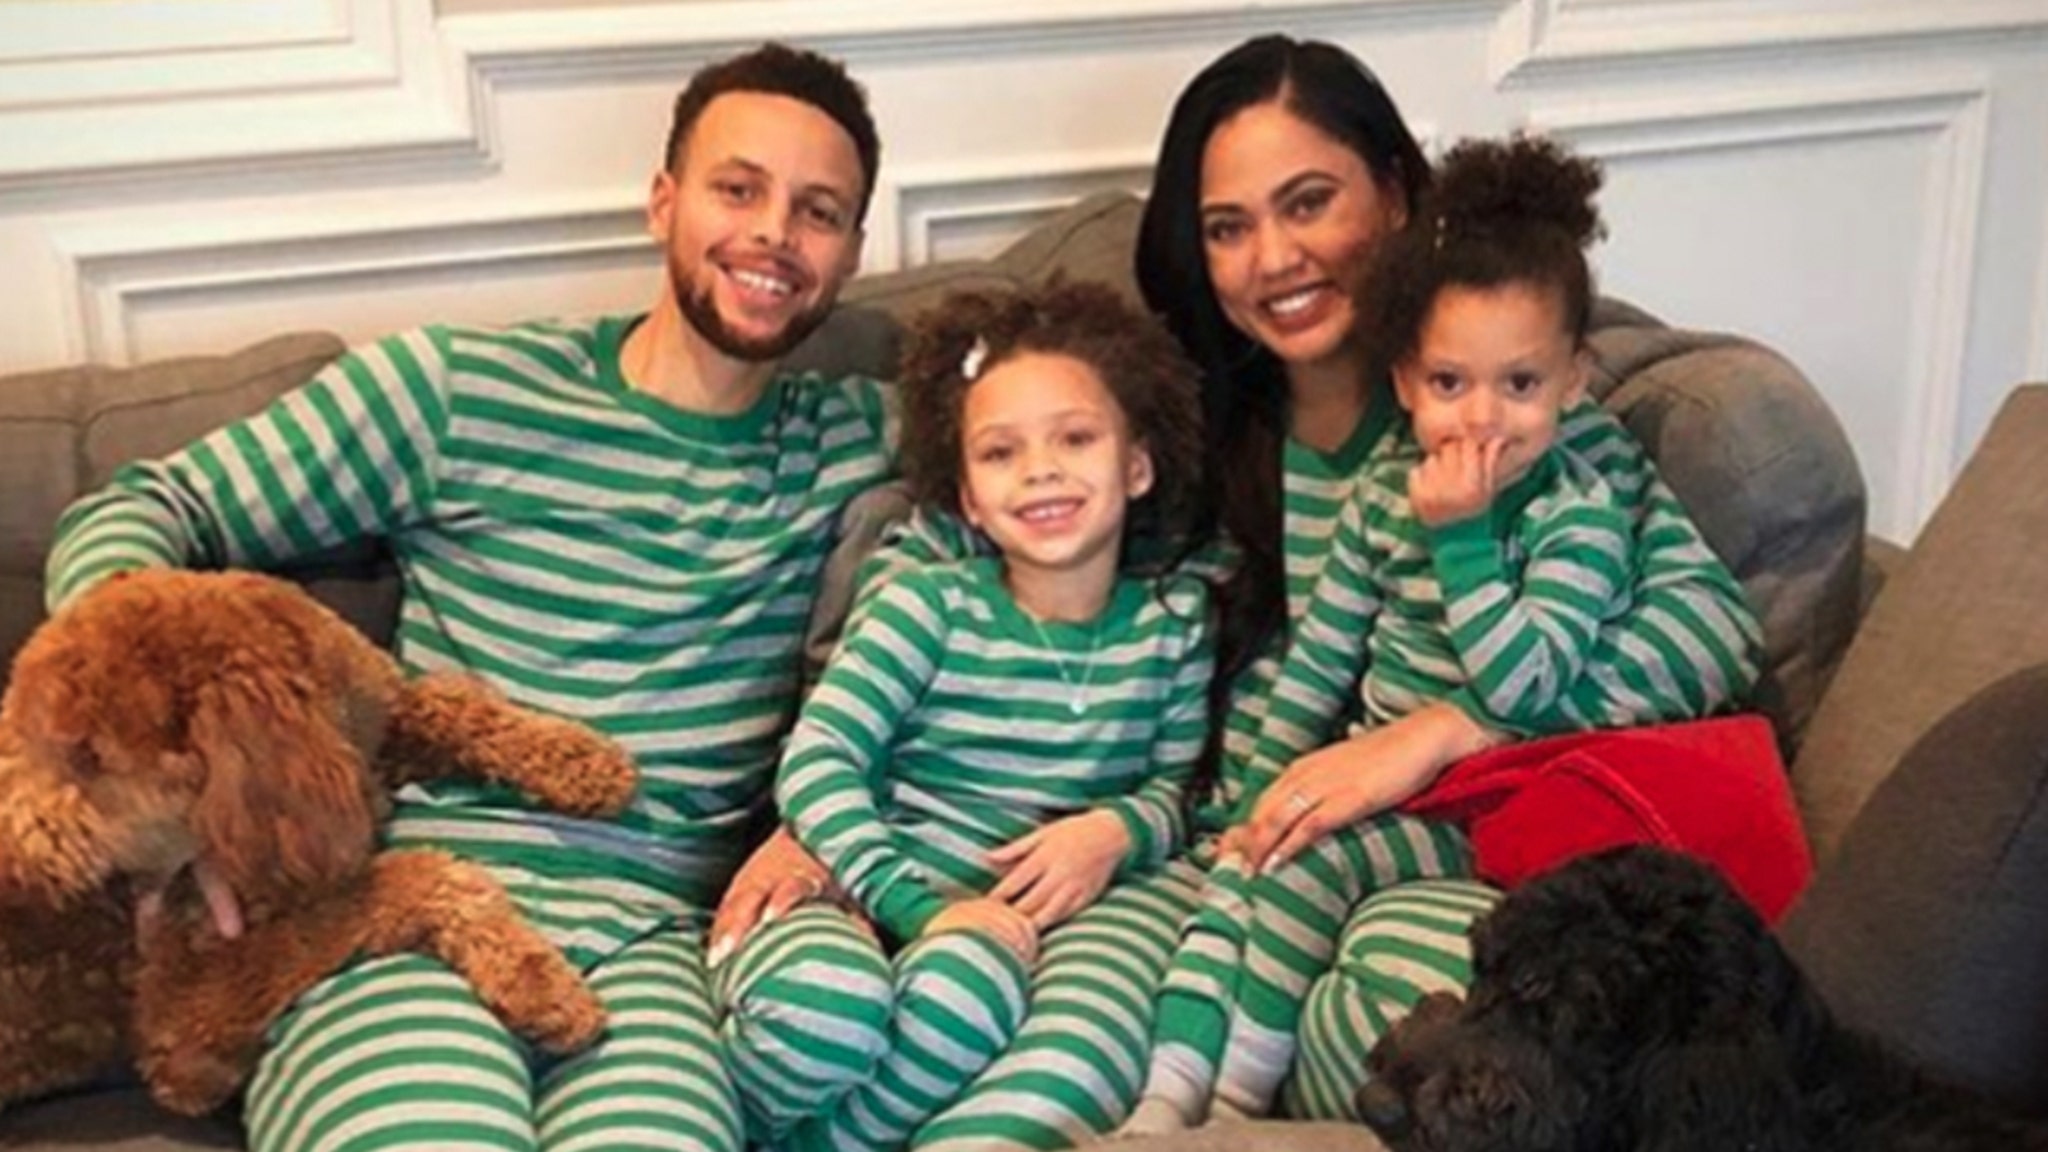 Celebs Matching Their Way Into The Holidays